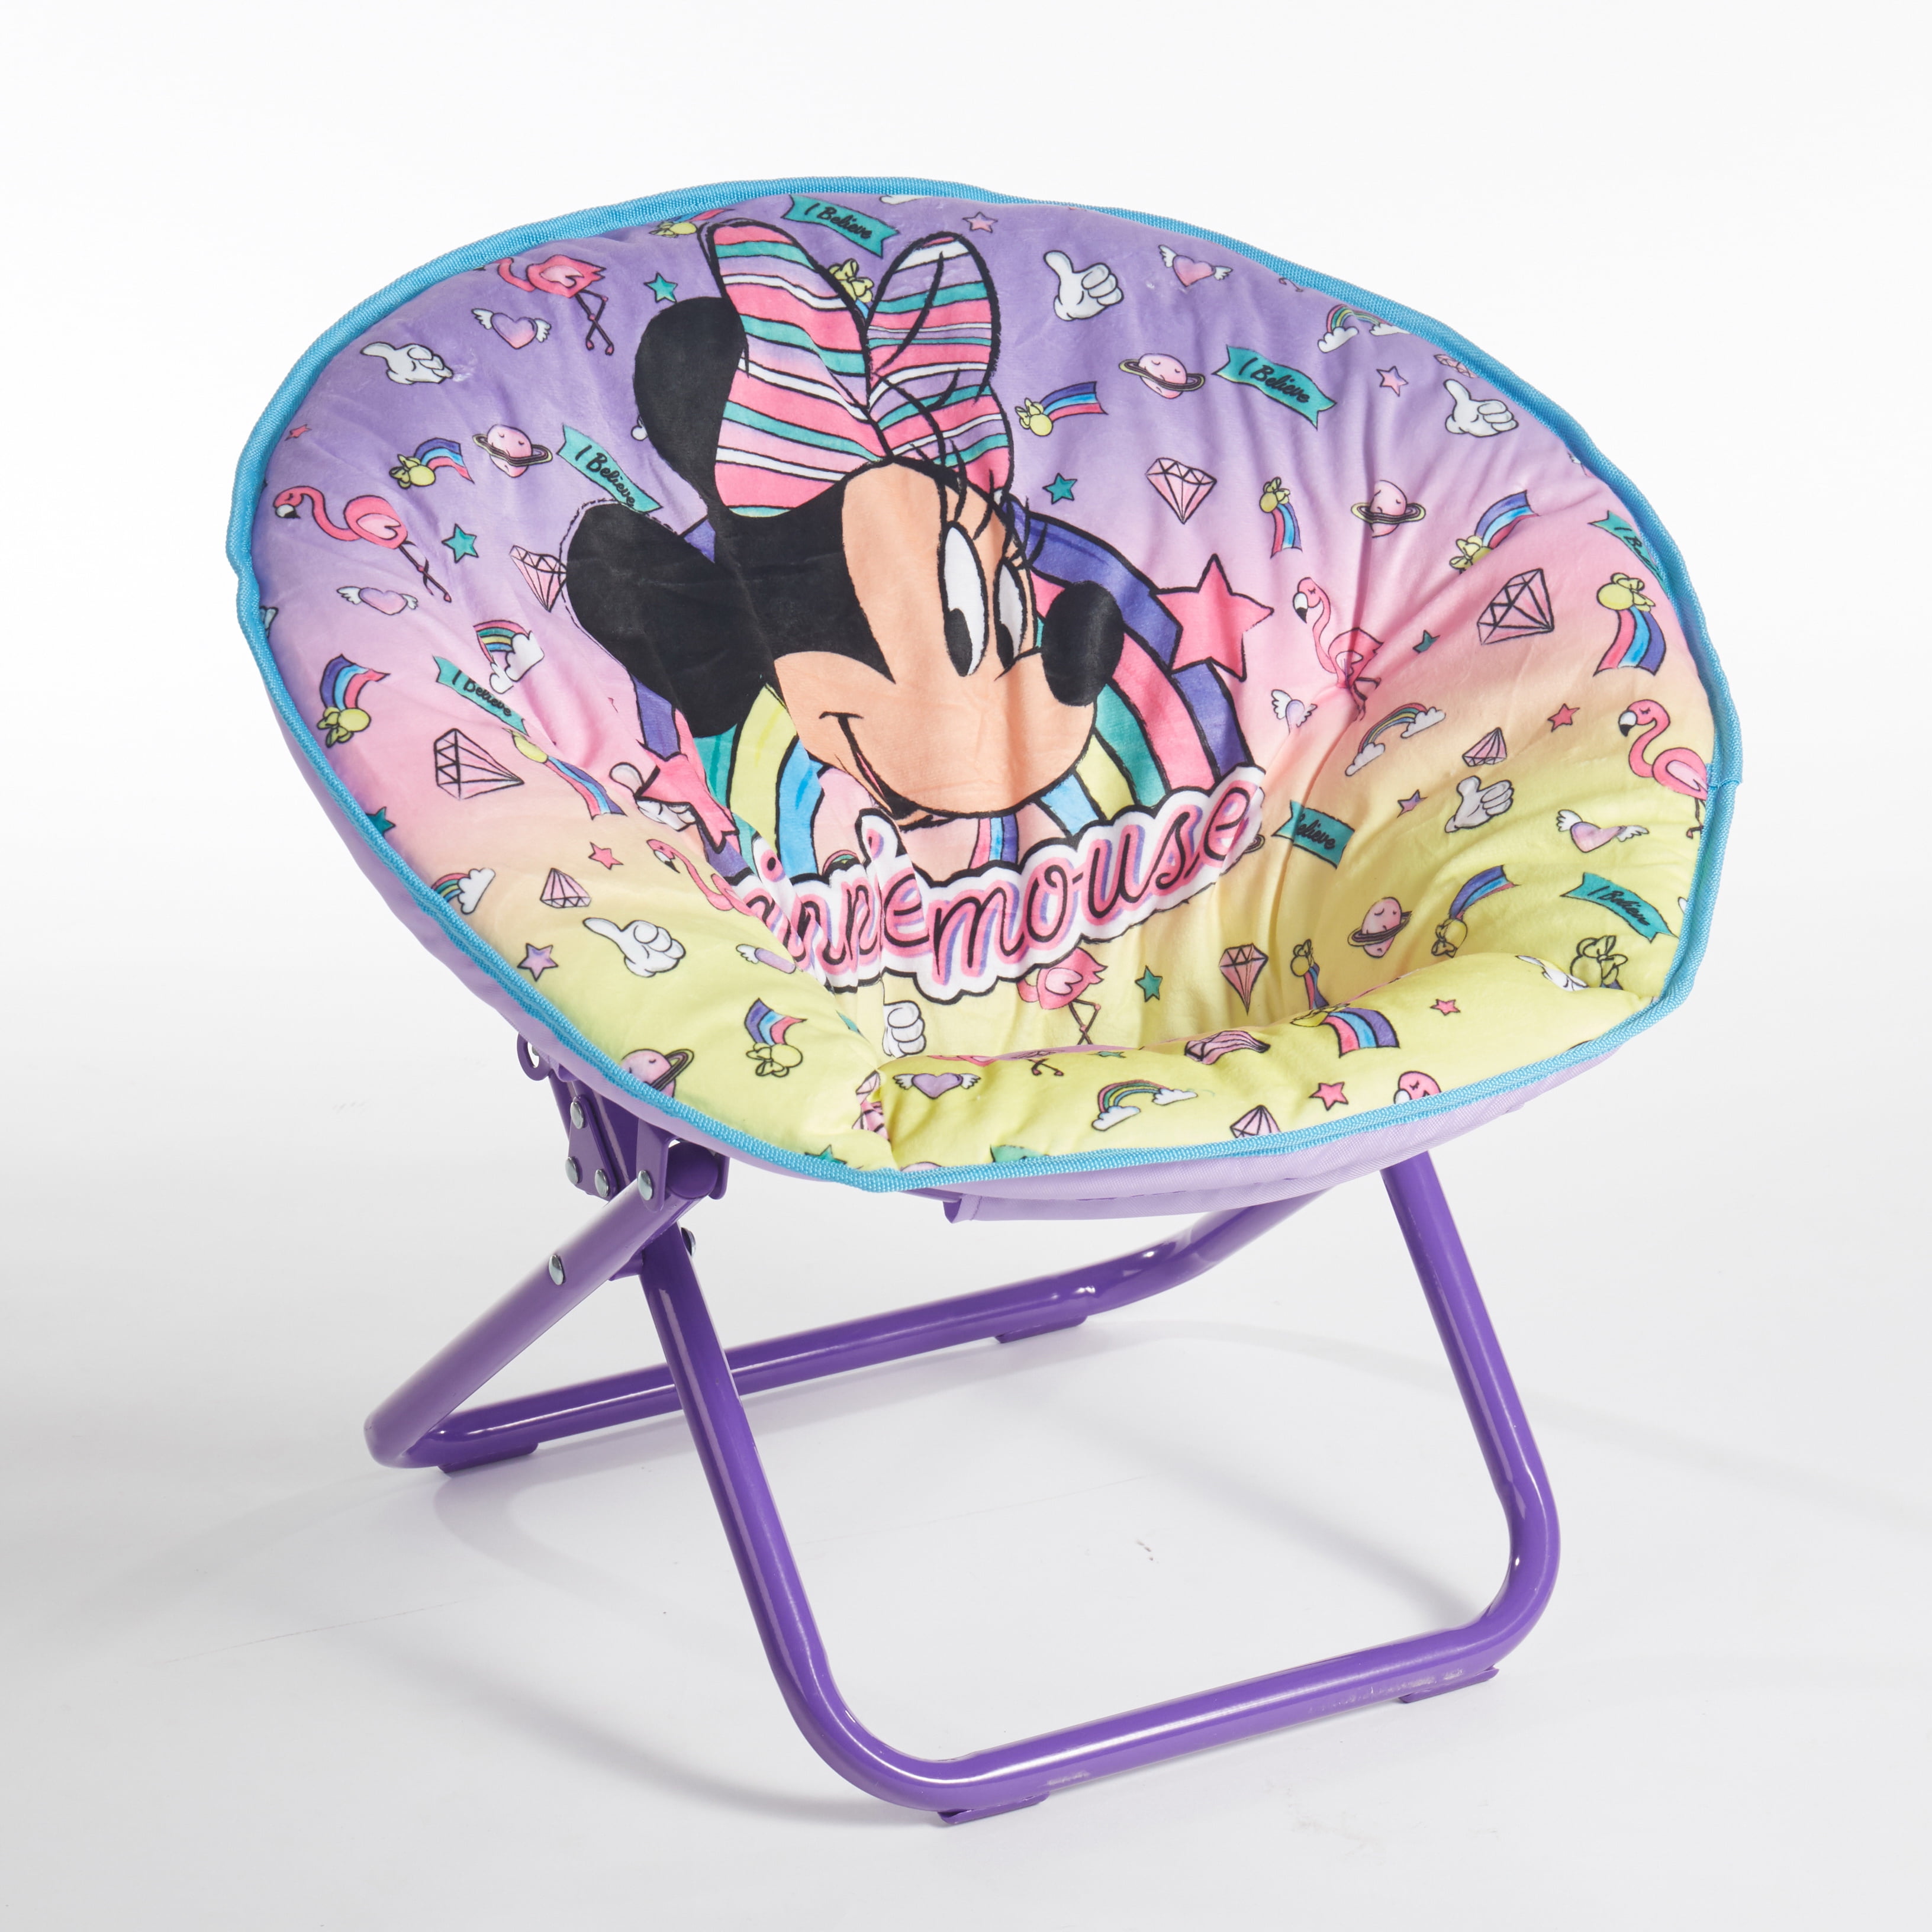 Minnie Mouse Disney Saucer Chair Pink Toddler Kids Seat Portable Character Comfortable Seating Saucer Shape Sturdy Metal Frame Polyester Cushioned Seat Playroom Easy Storage Bedroom 